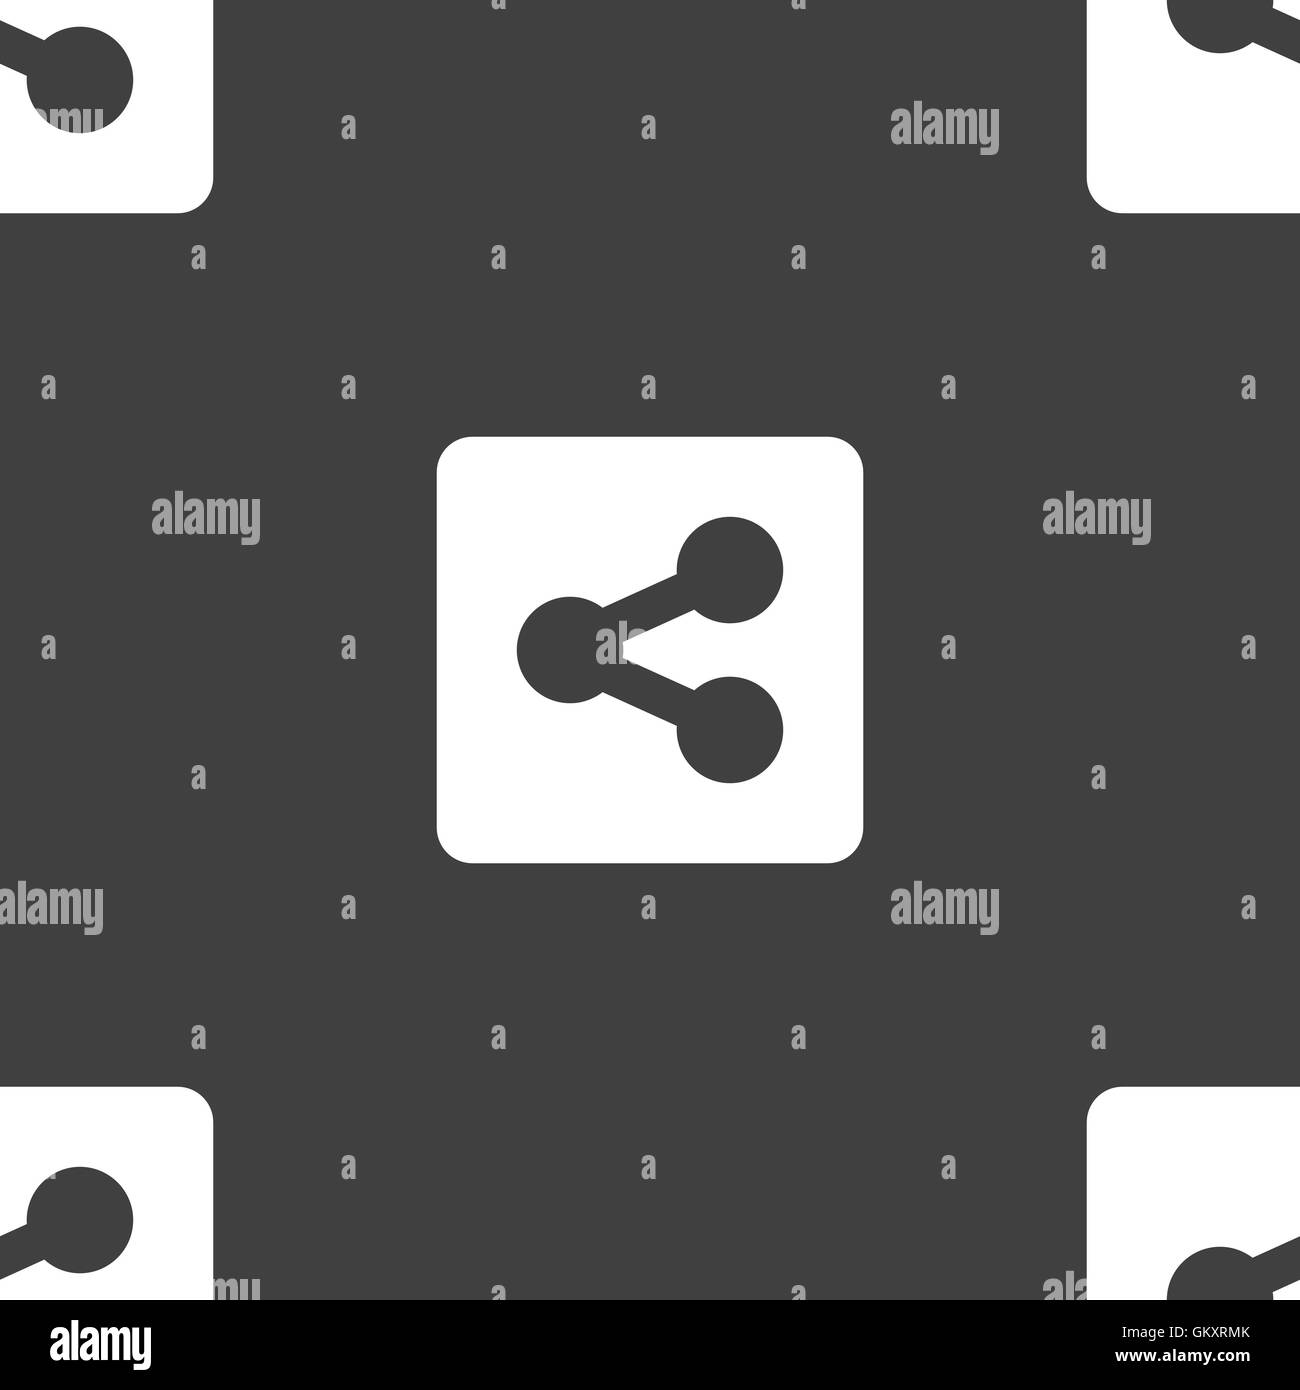 Share  icon sign. Seamless pattern on a gray background. Vector Stock Vector